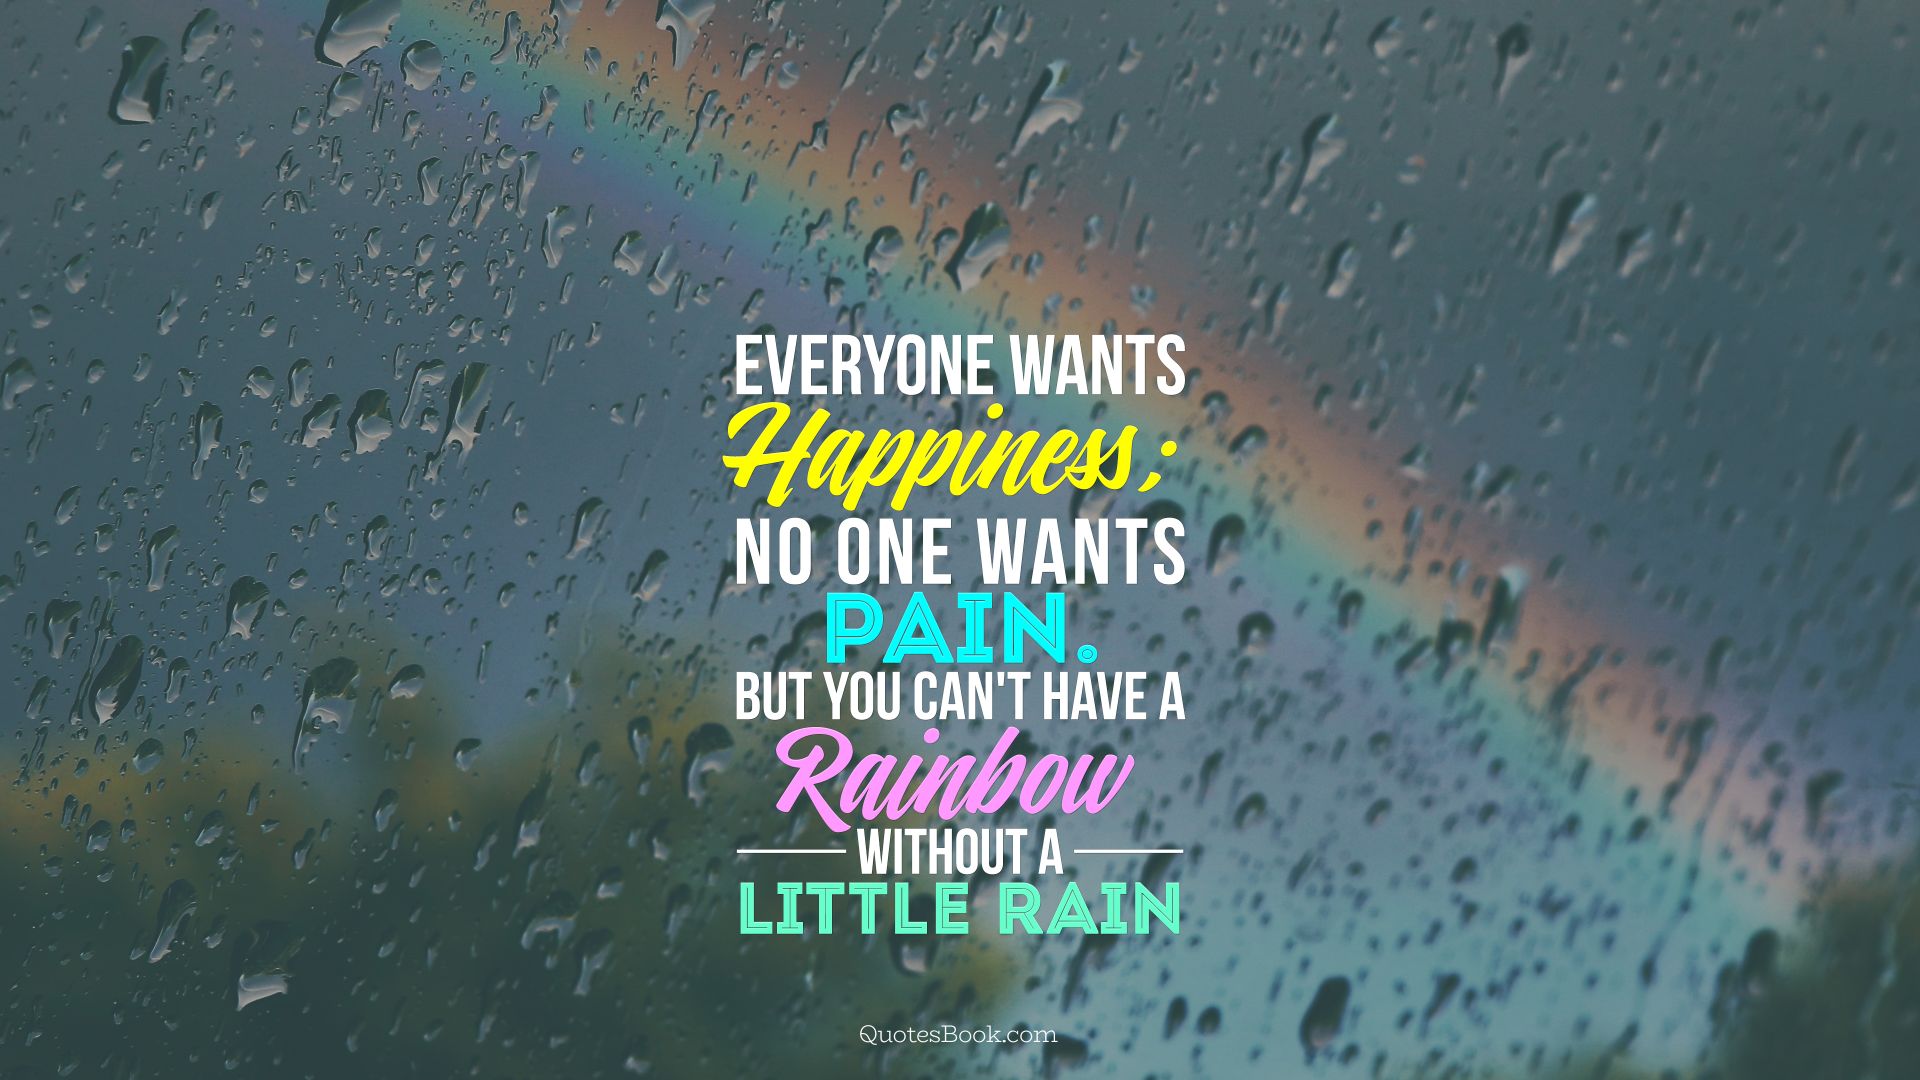 Everyone wants happiness; no one wants pain. But you can't have a rainbow without a little rain